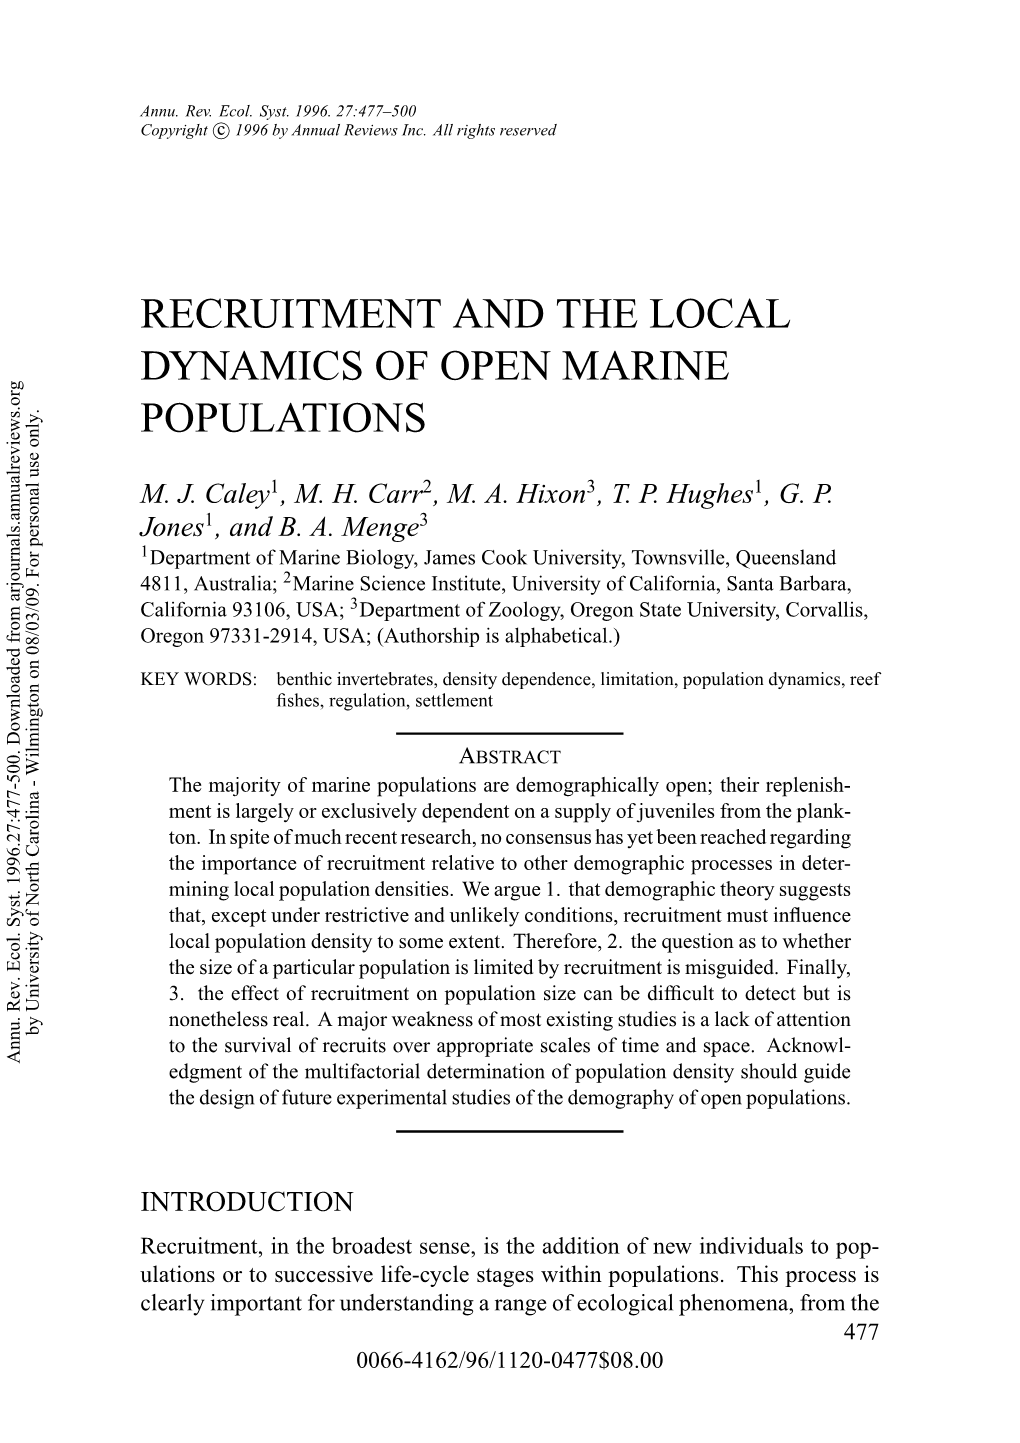 Recruitment and the Local Dynamics of Open Marine Populations